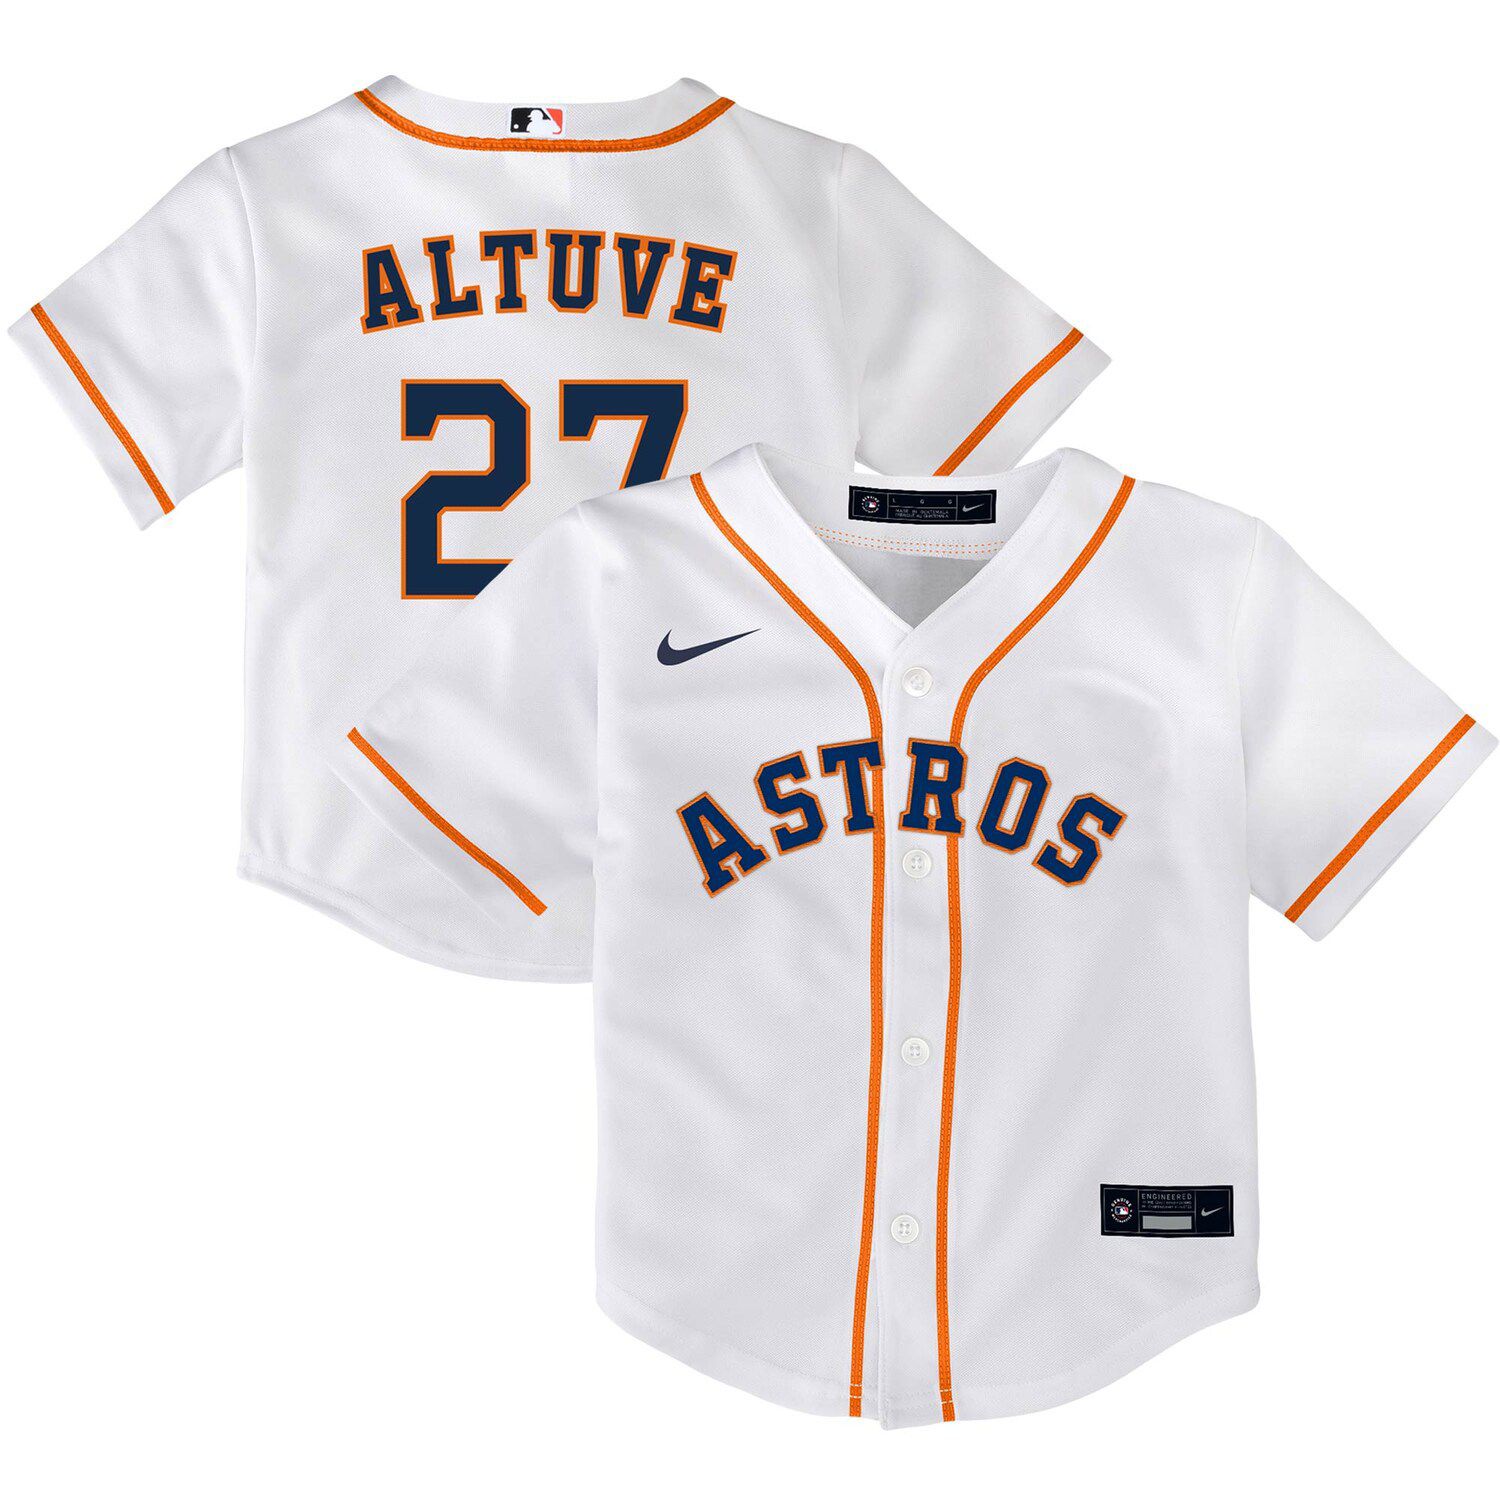 youth houston astros jersey